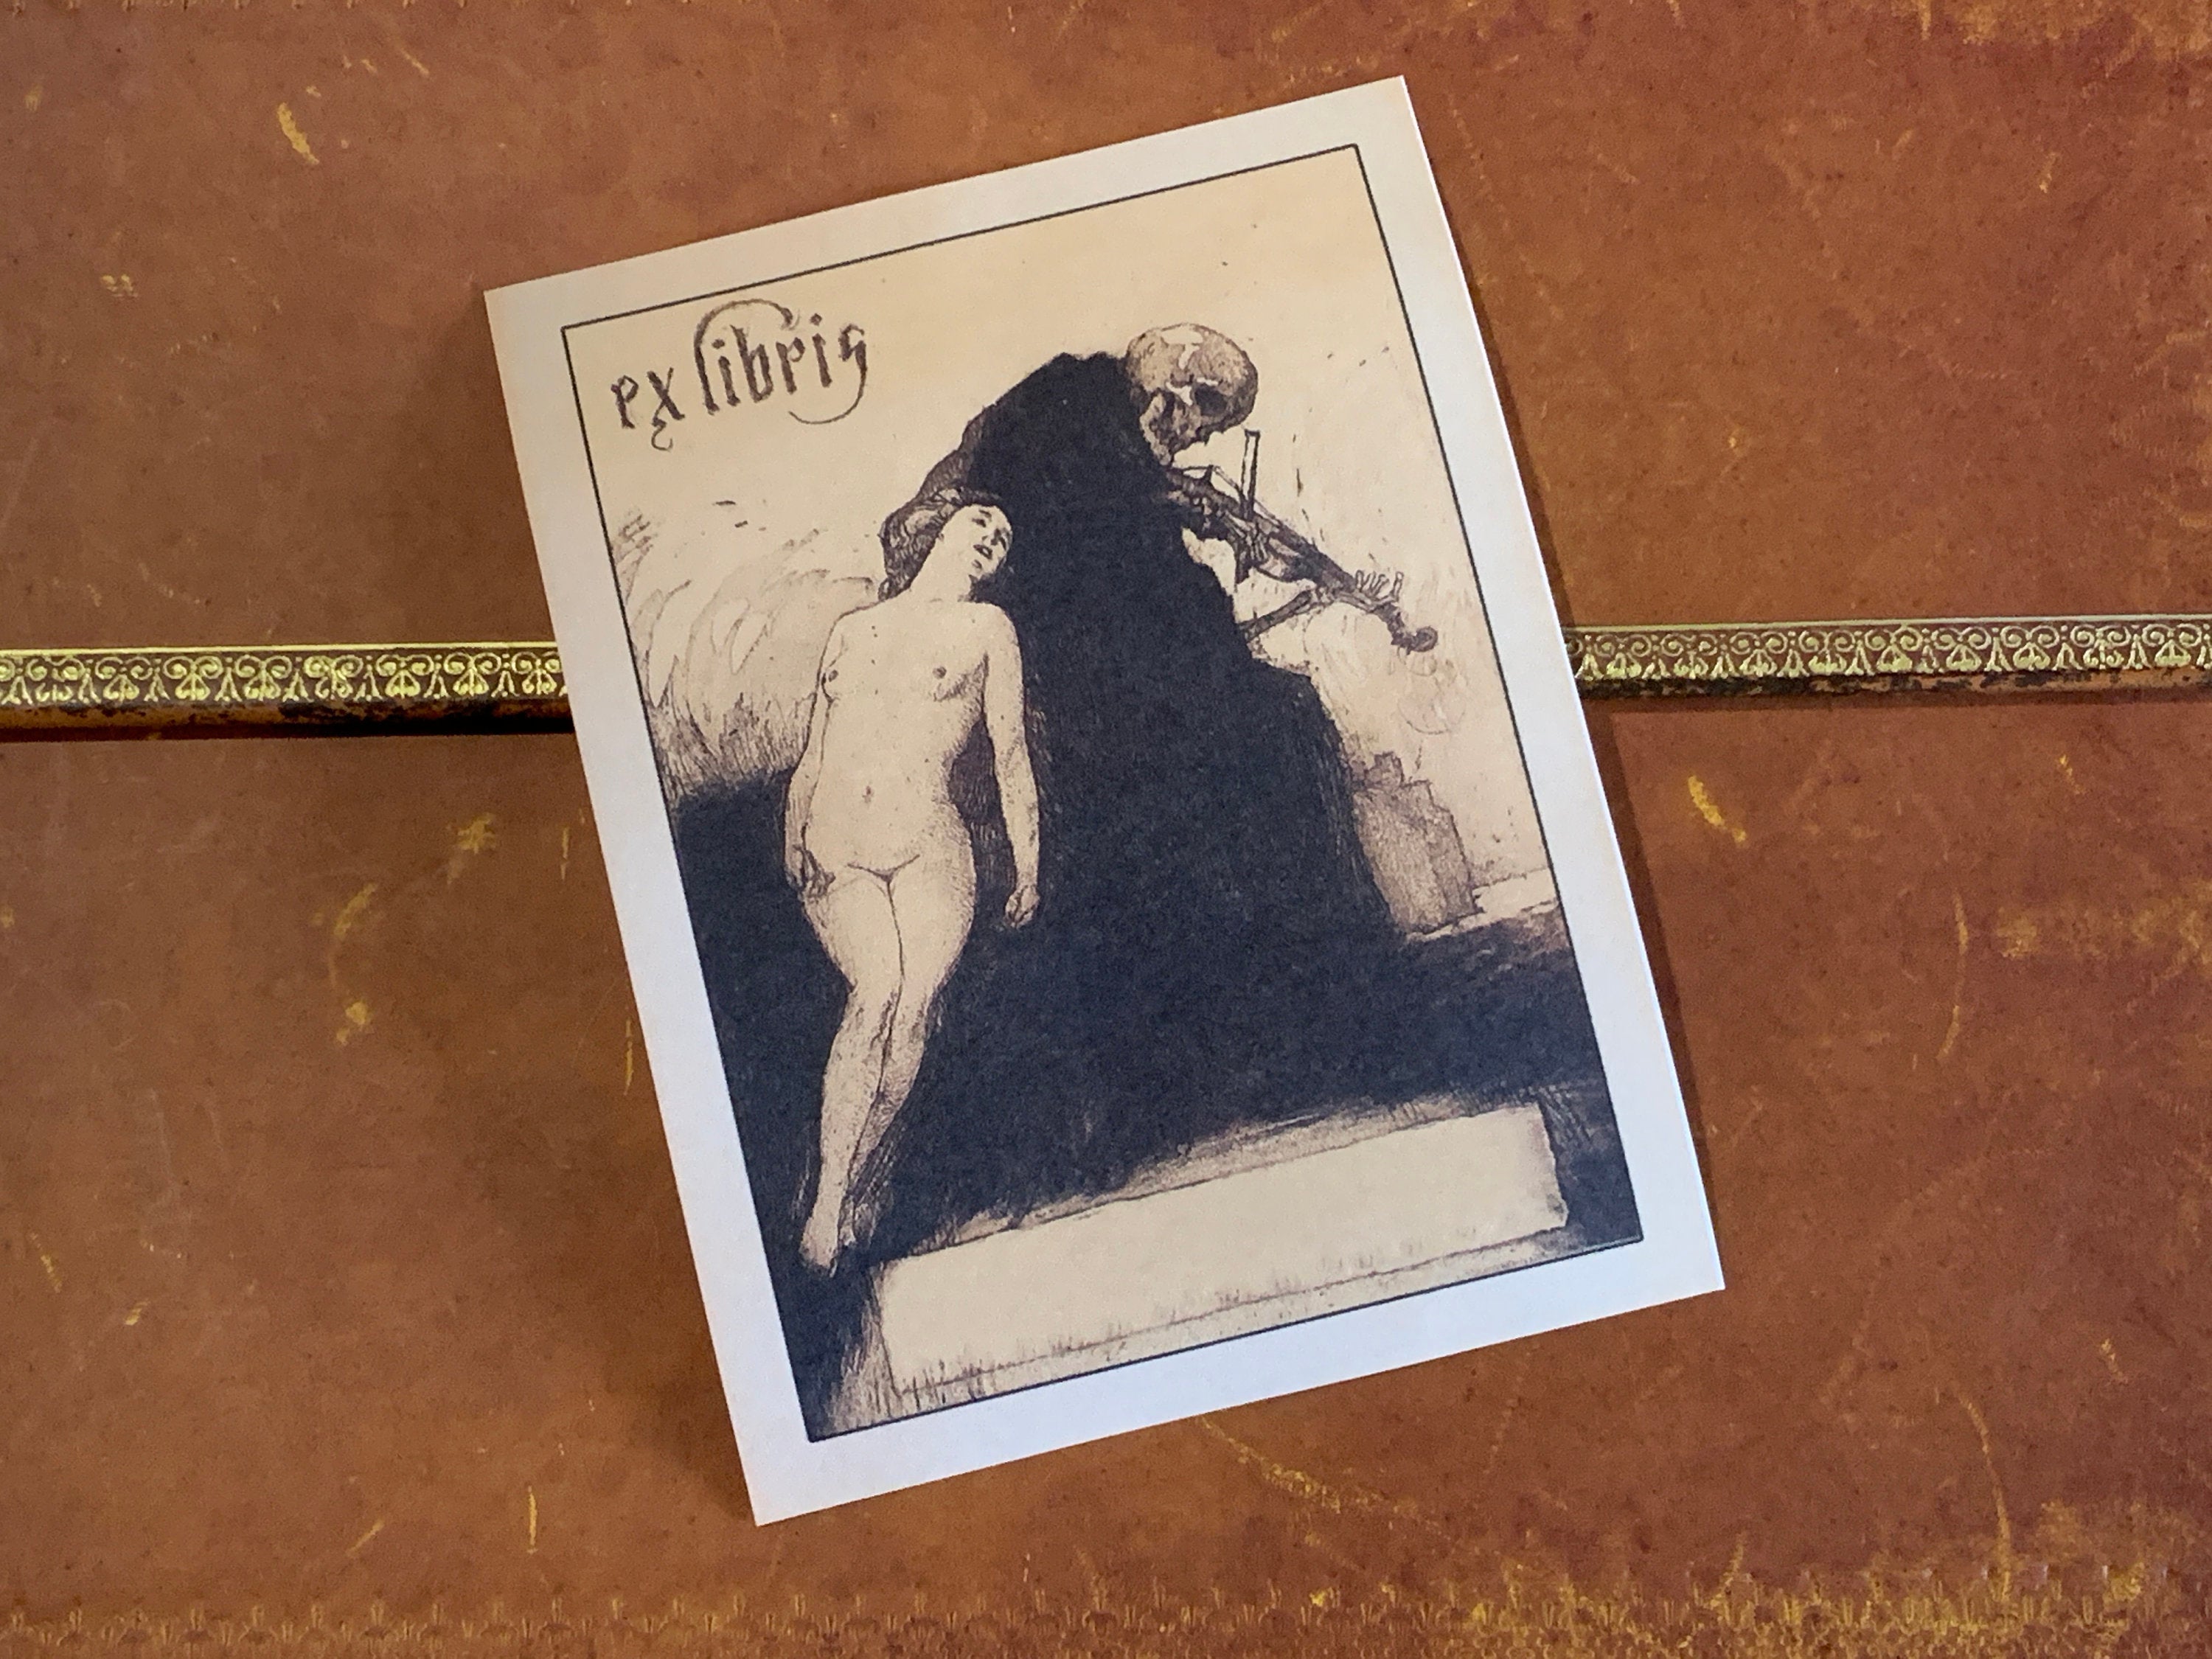 Death's Music, Personalized Gothic Ex-Libris Bookplates, Crafted on Traditional Gummed Paper, 3in x 4in, Set of 30